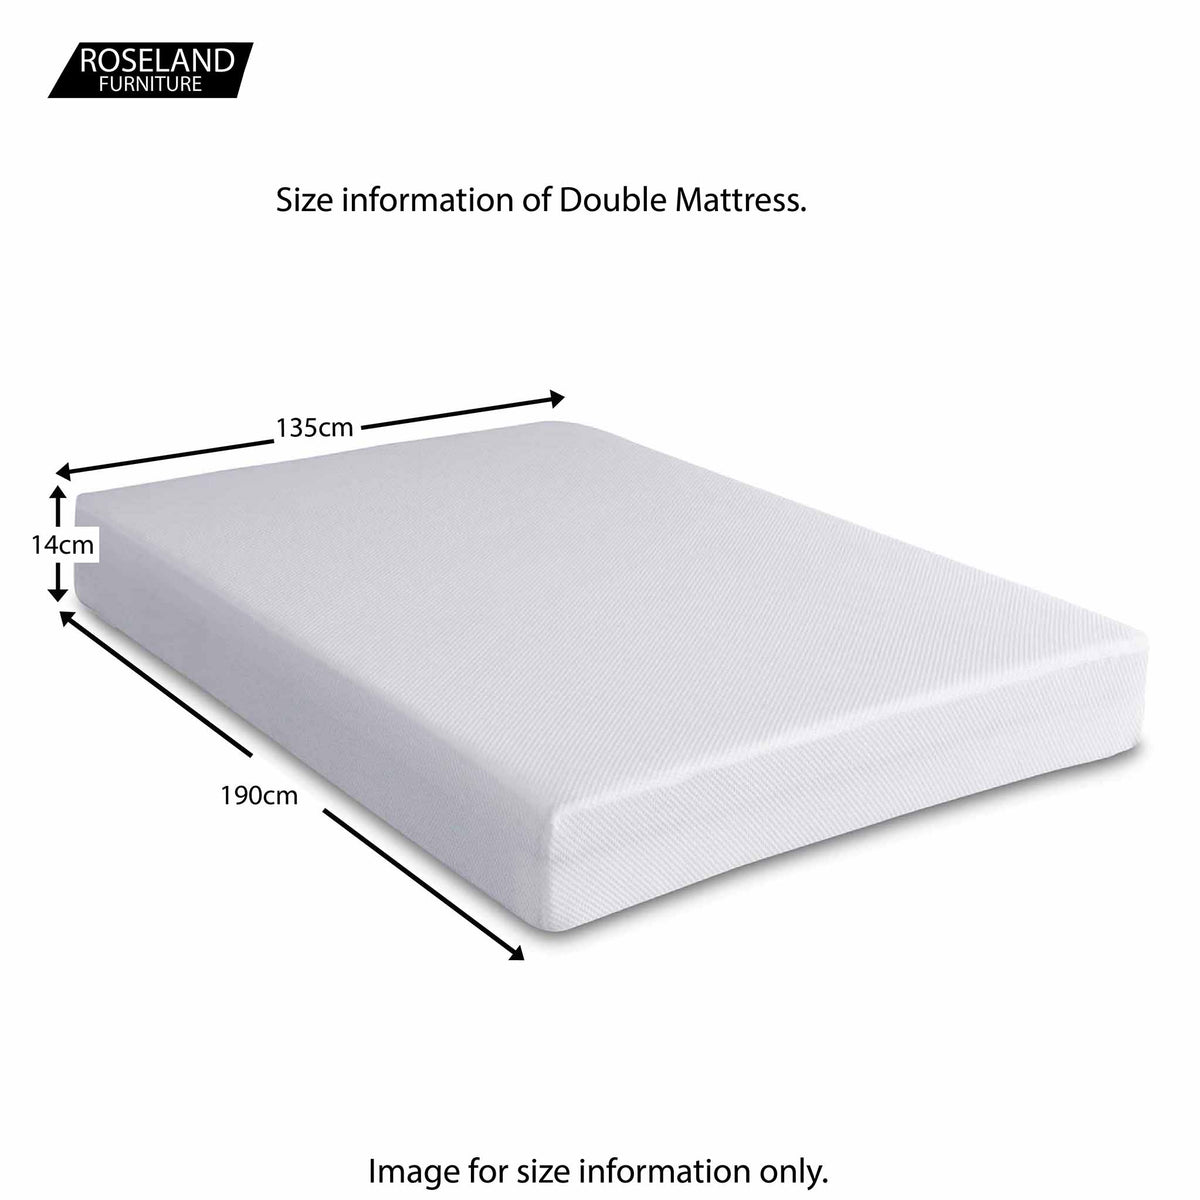 MemoryPedic Reflex Adults 4ft 6 Double Mattress - Size Guide